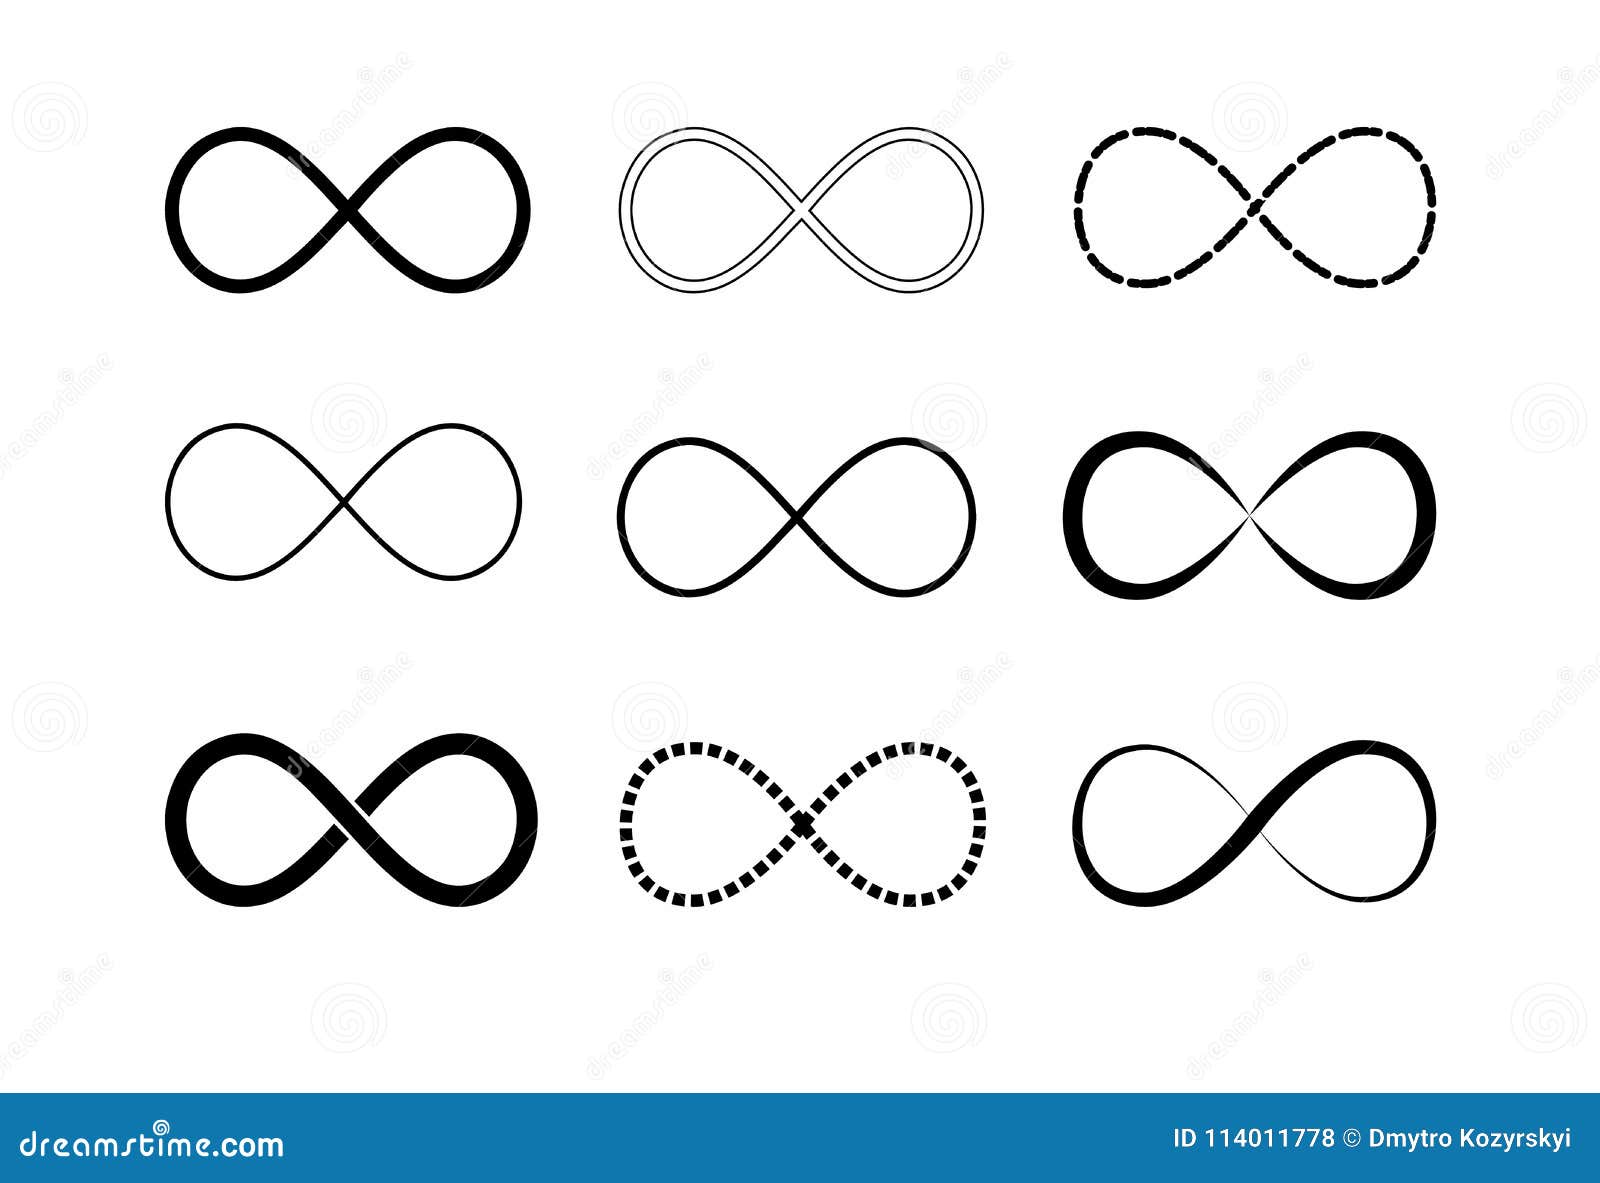 infinity  logos set. black contours.  of repetition and unlimited cyclicity.   on